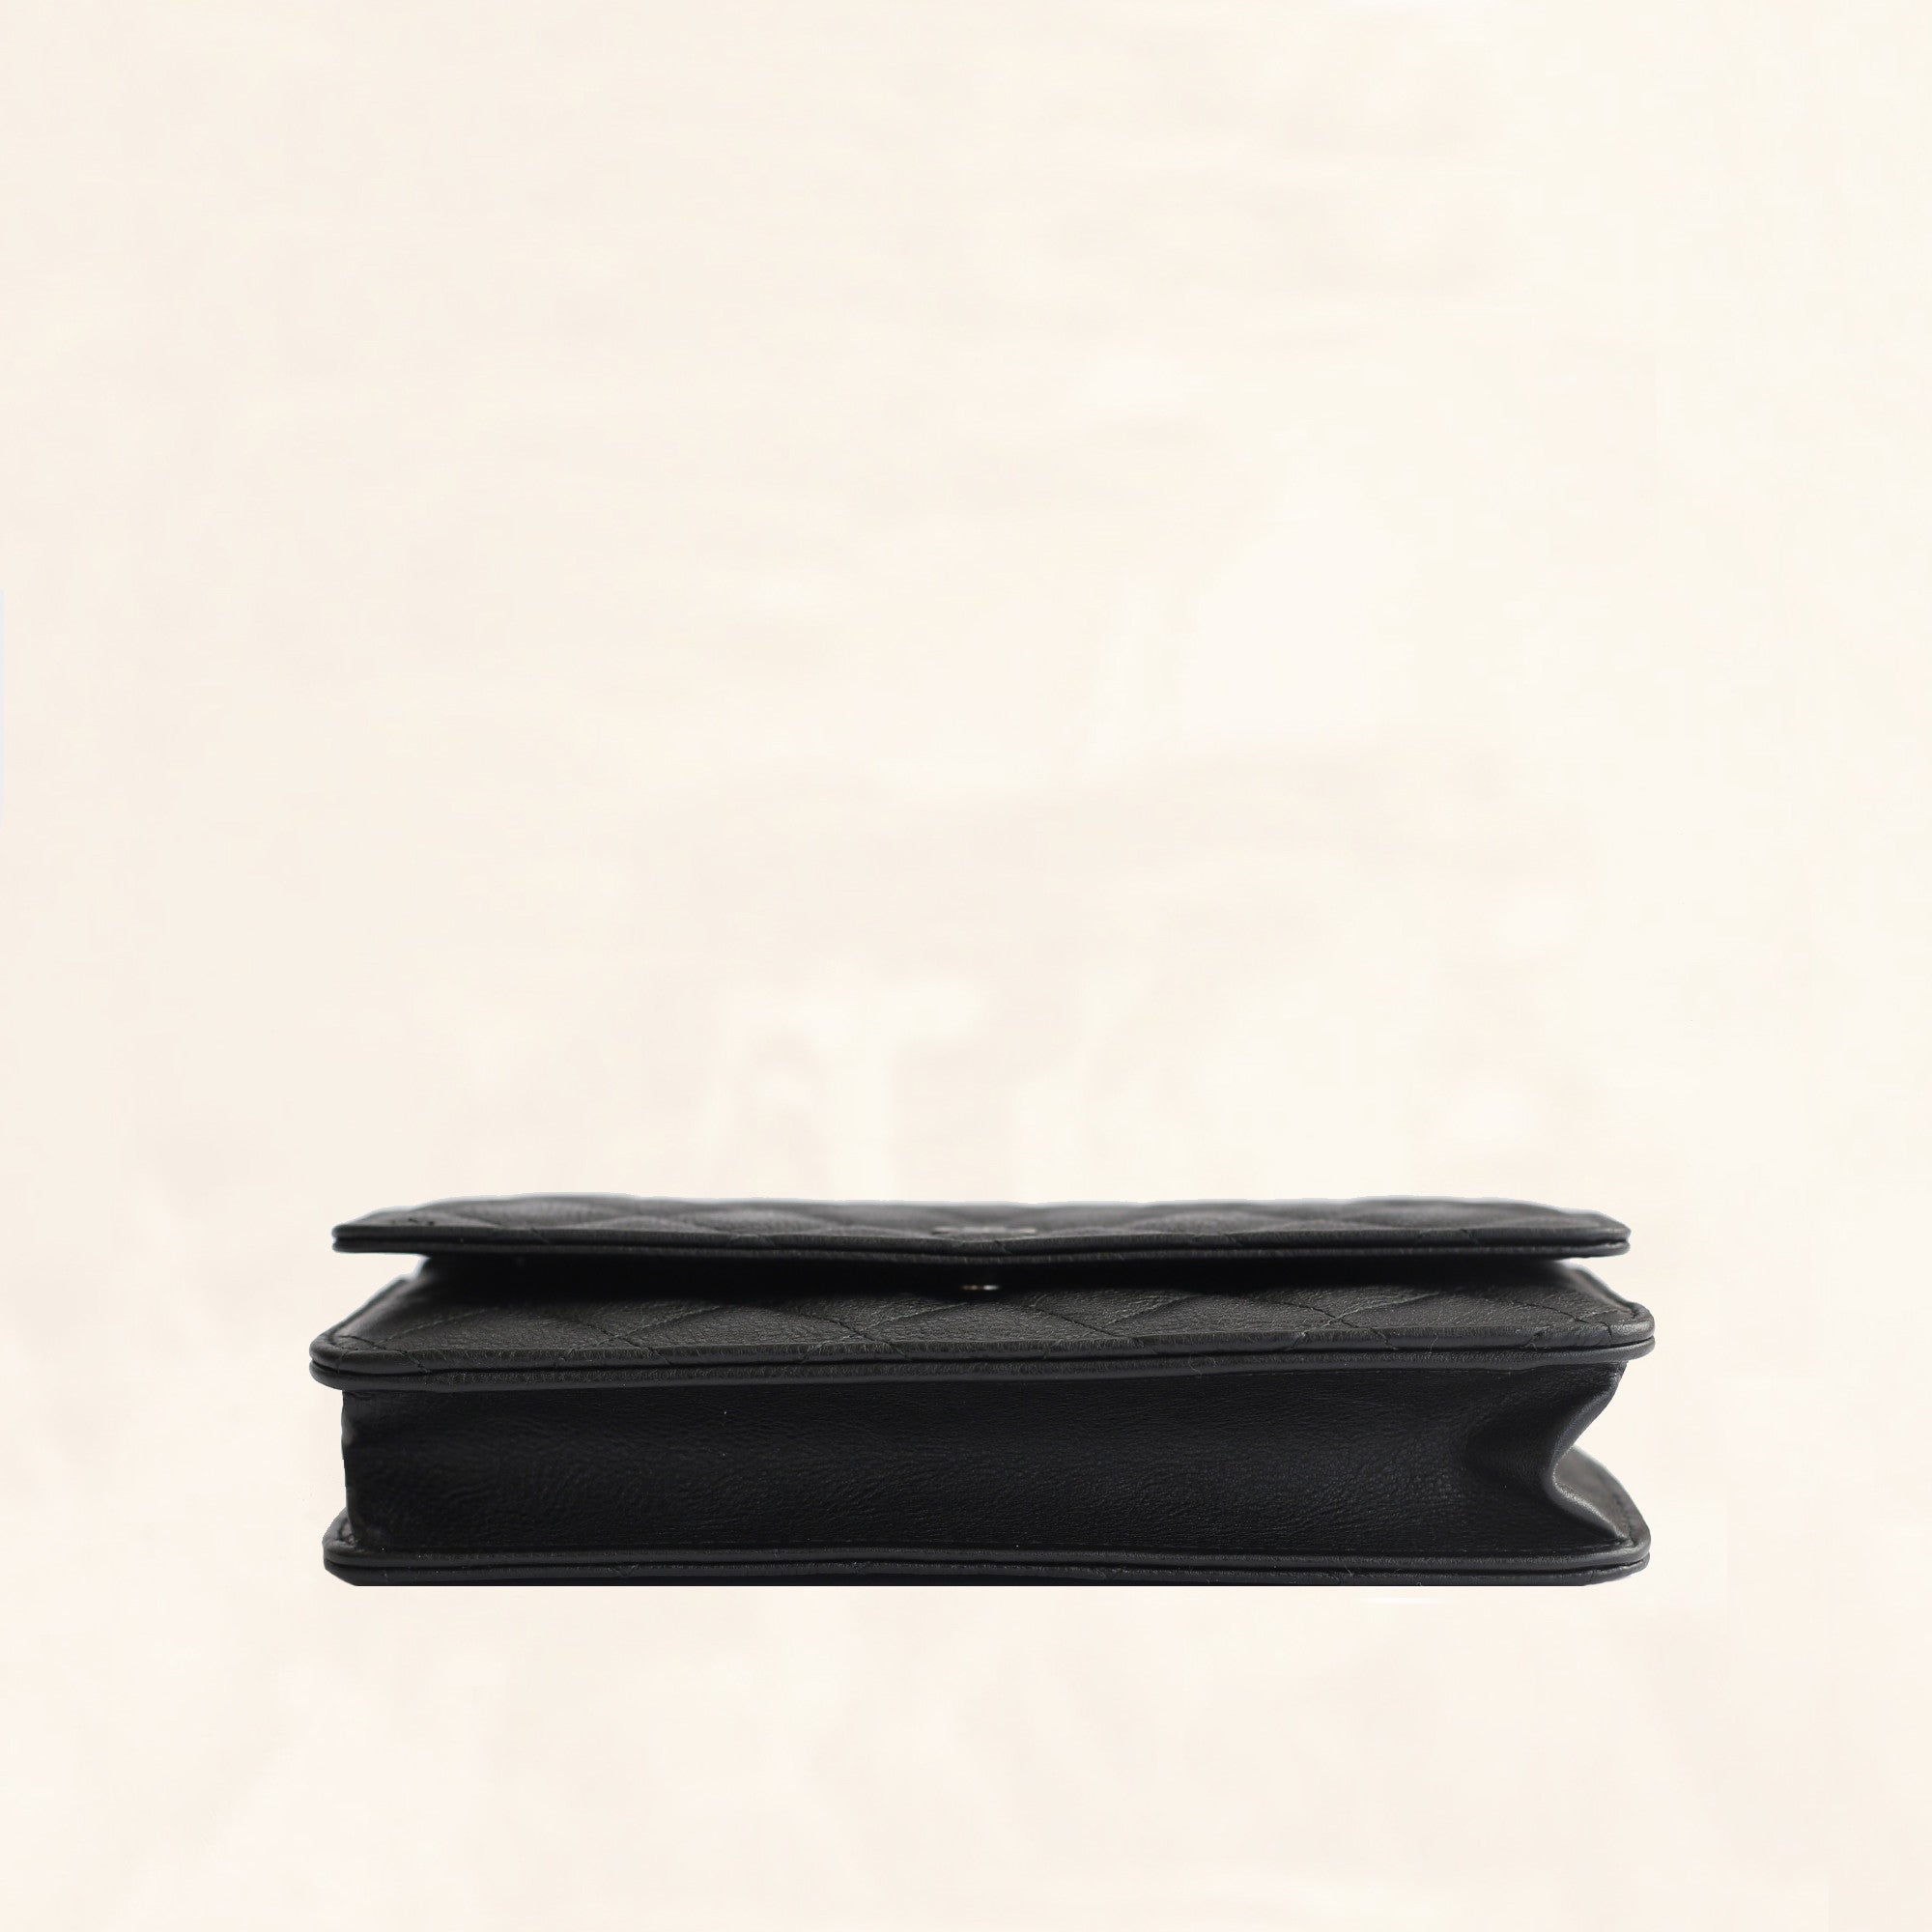 Timeless/classique leather wallet Chanel Black in Leather - 32585767